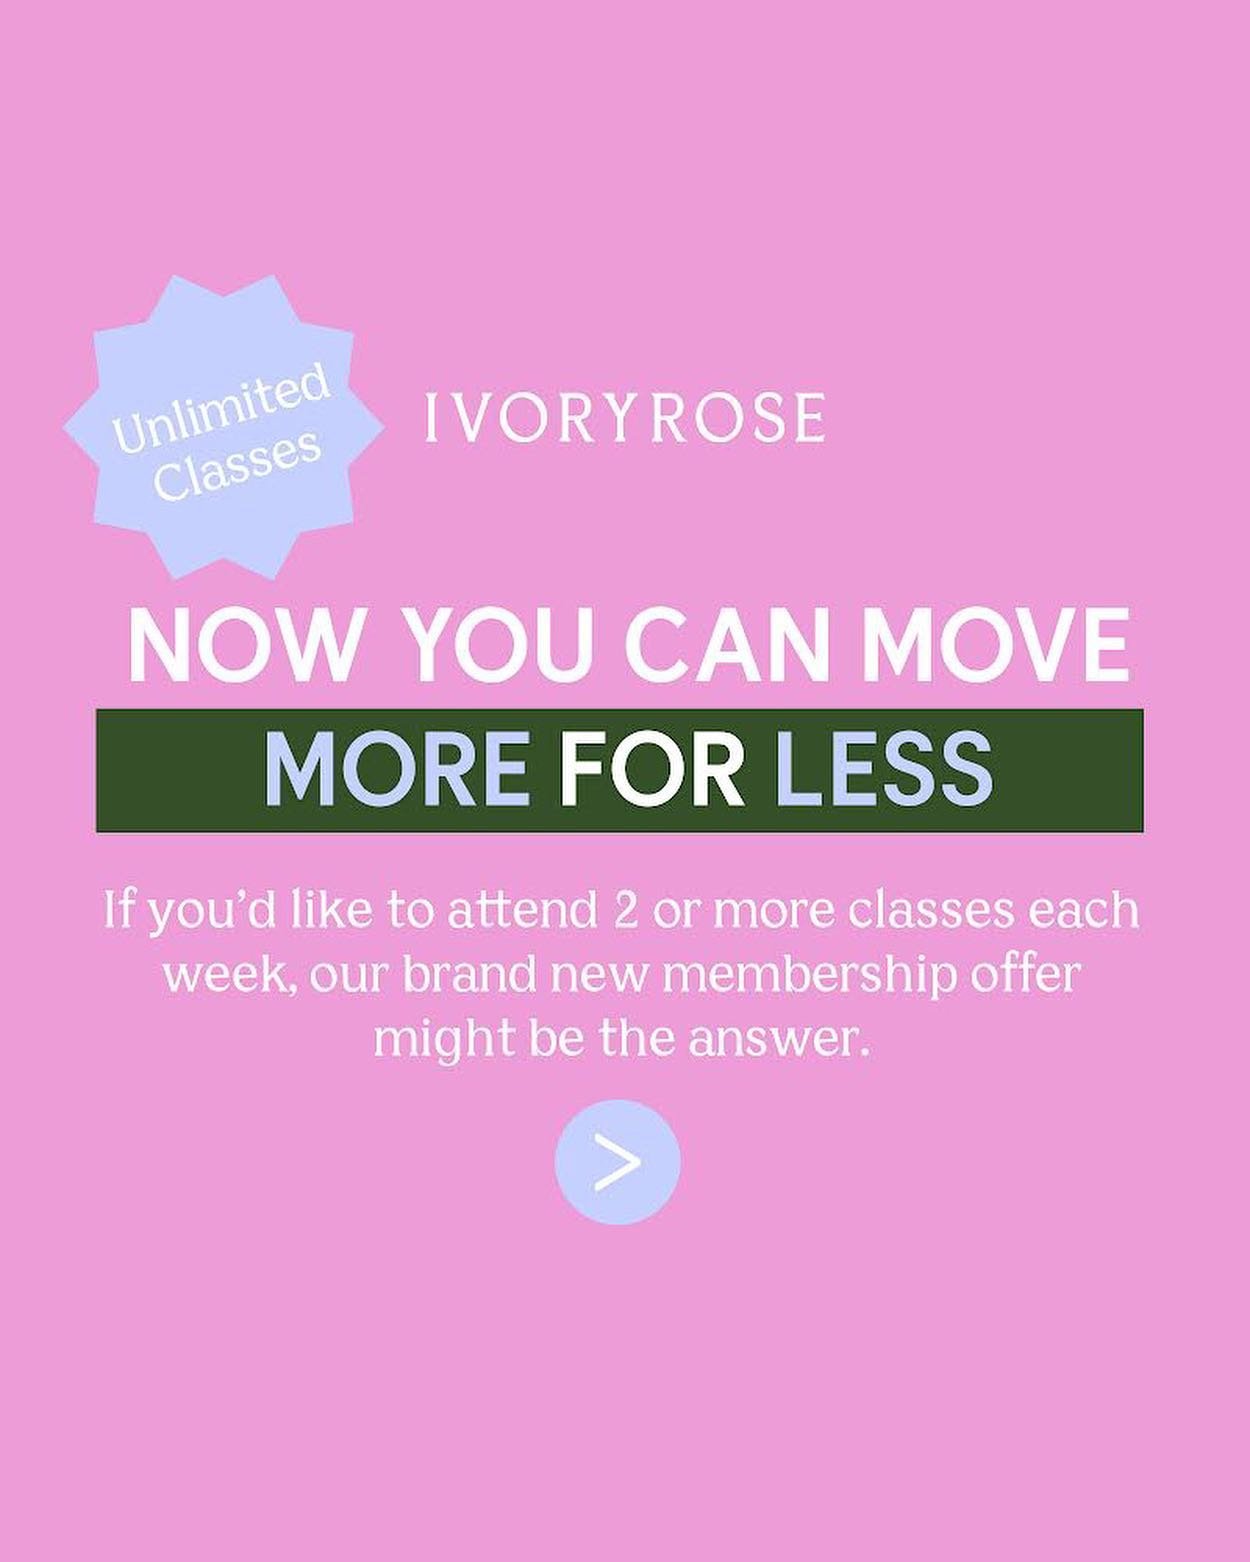 One class per week is great for mobility and strength, but if you want to start feeling real results: 2 or more classes each week is the sweet spot to fast track  healthier, happier, stronger 💪🏽 you. 

And now, you can move more for less with our b